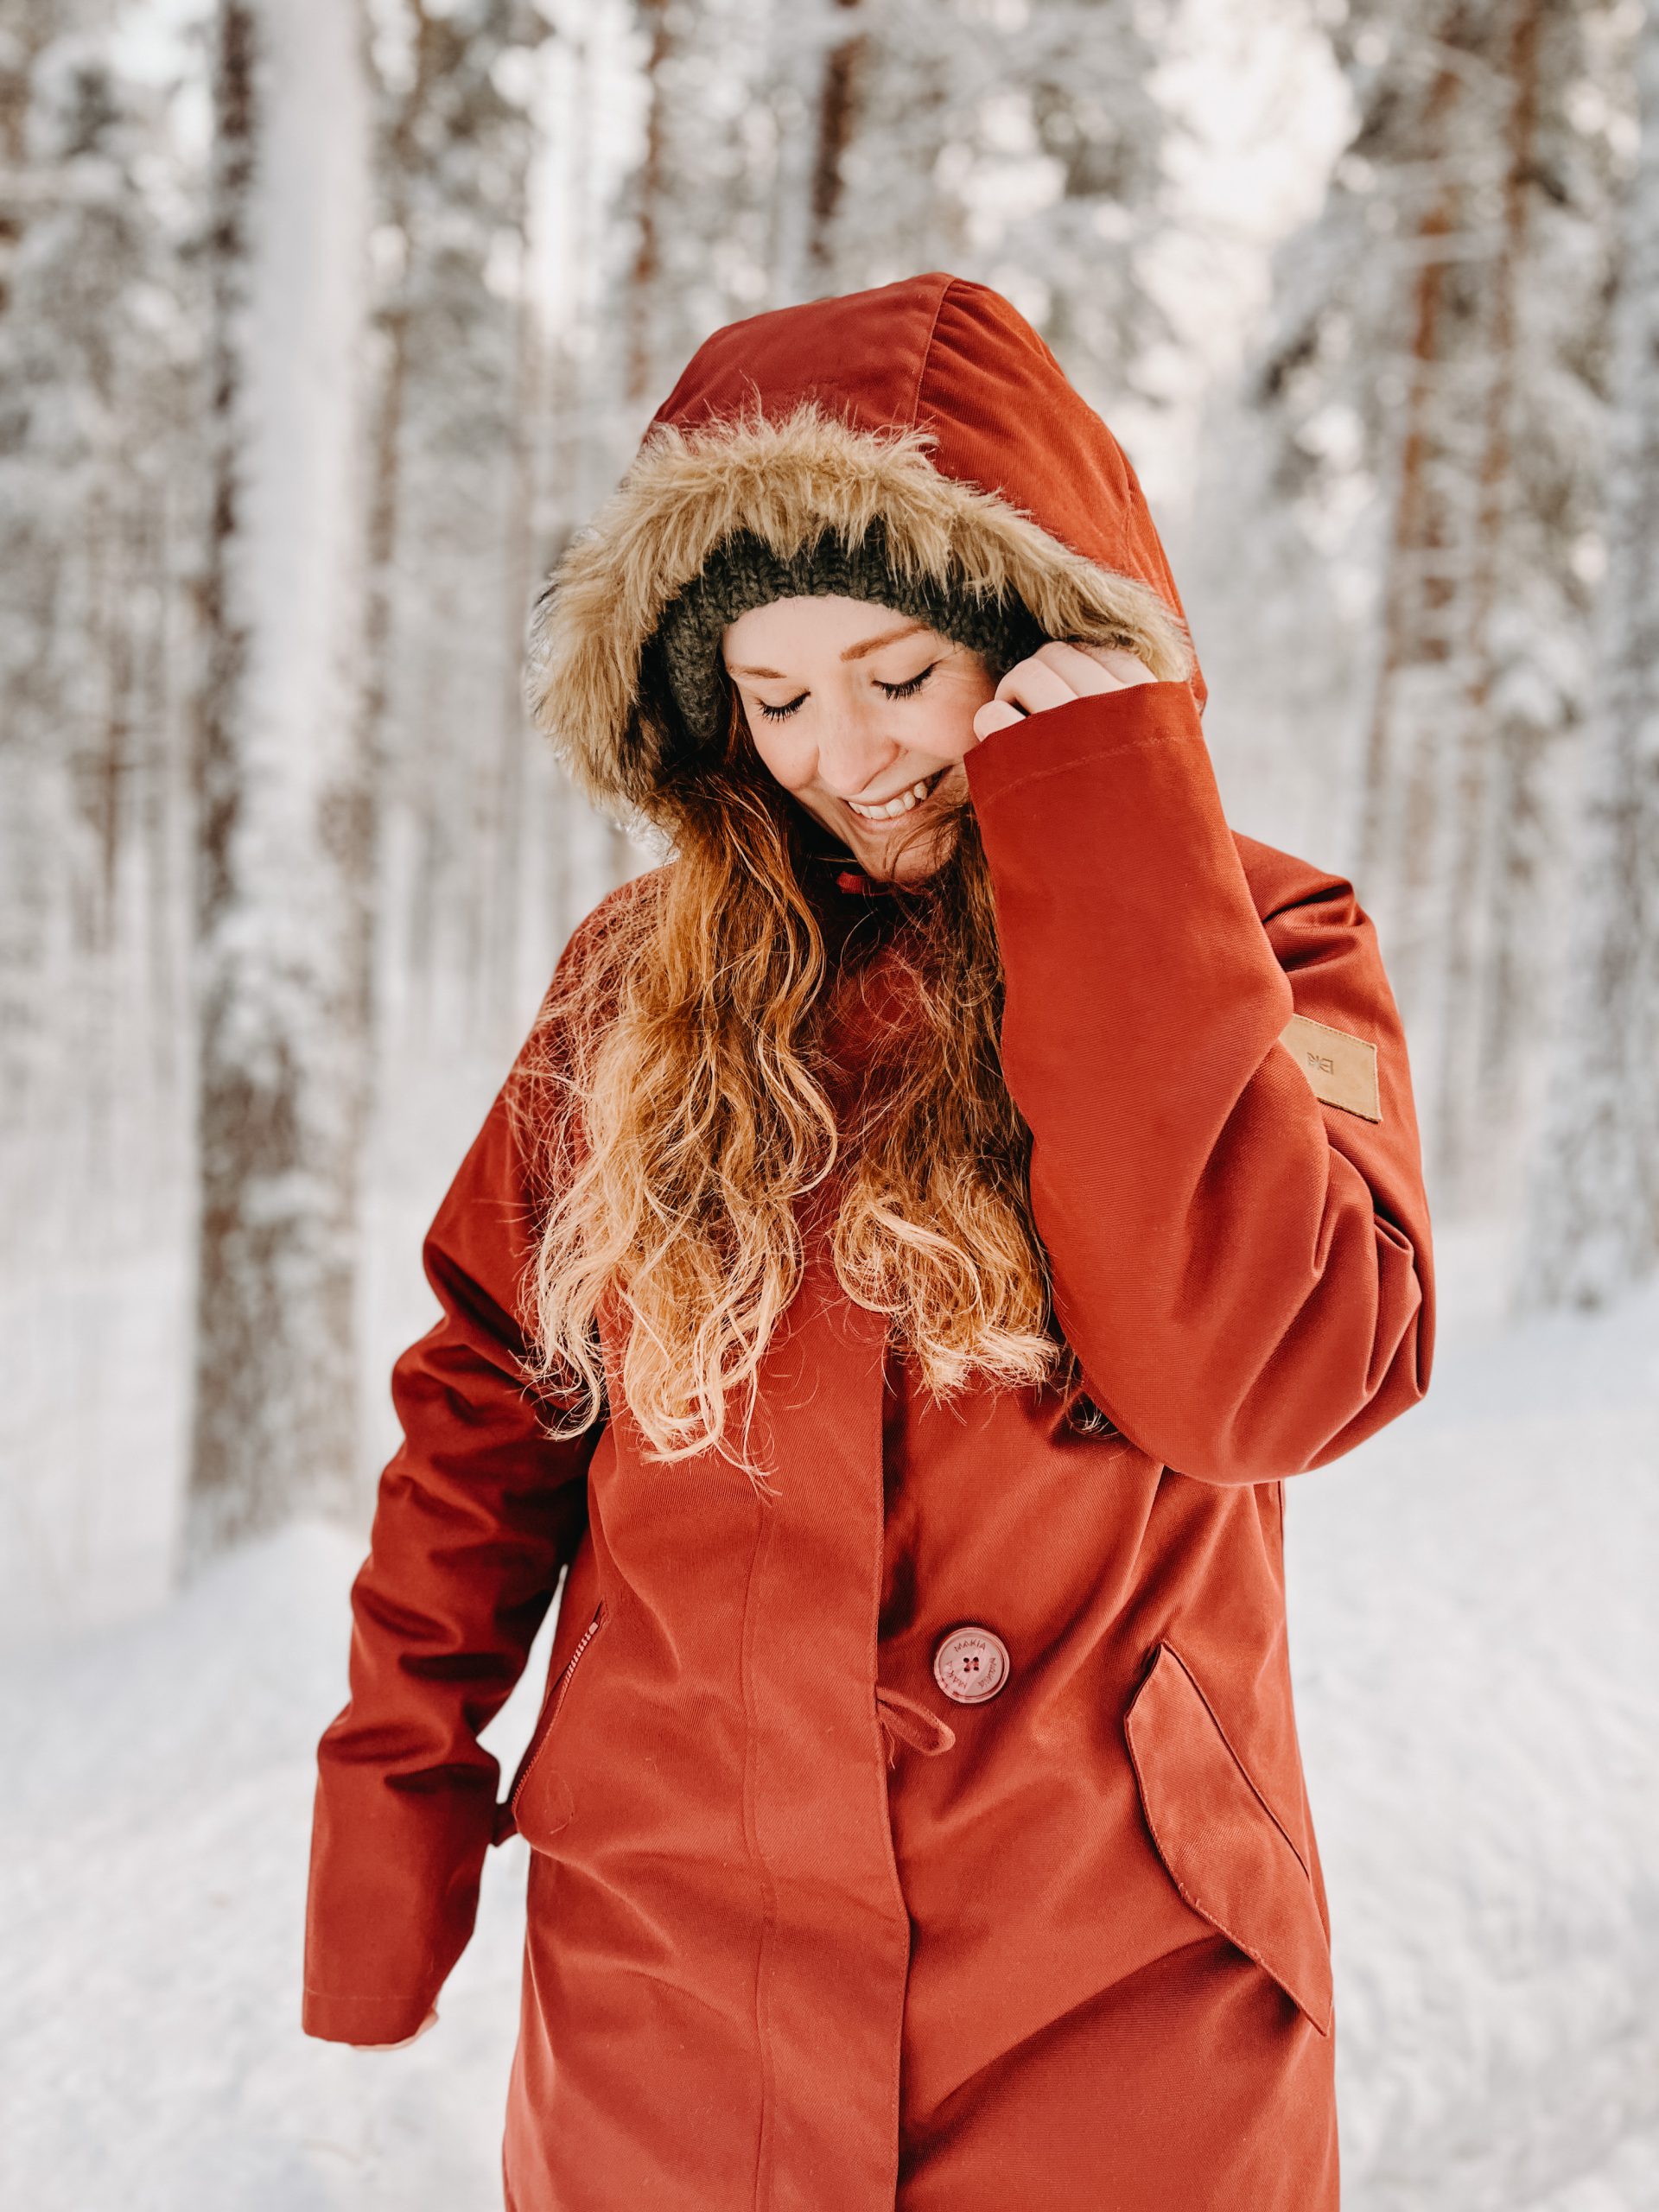 Cold Weather & Finnish Winter Clothing Guide - kathrin deter -